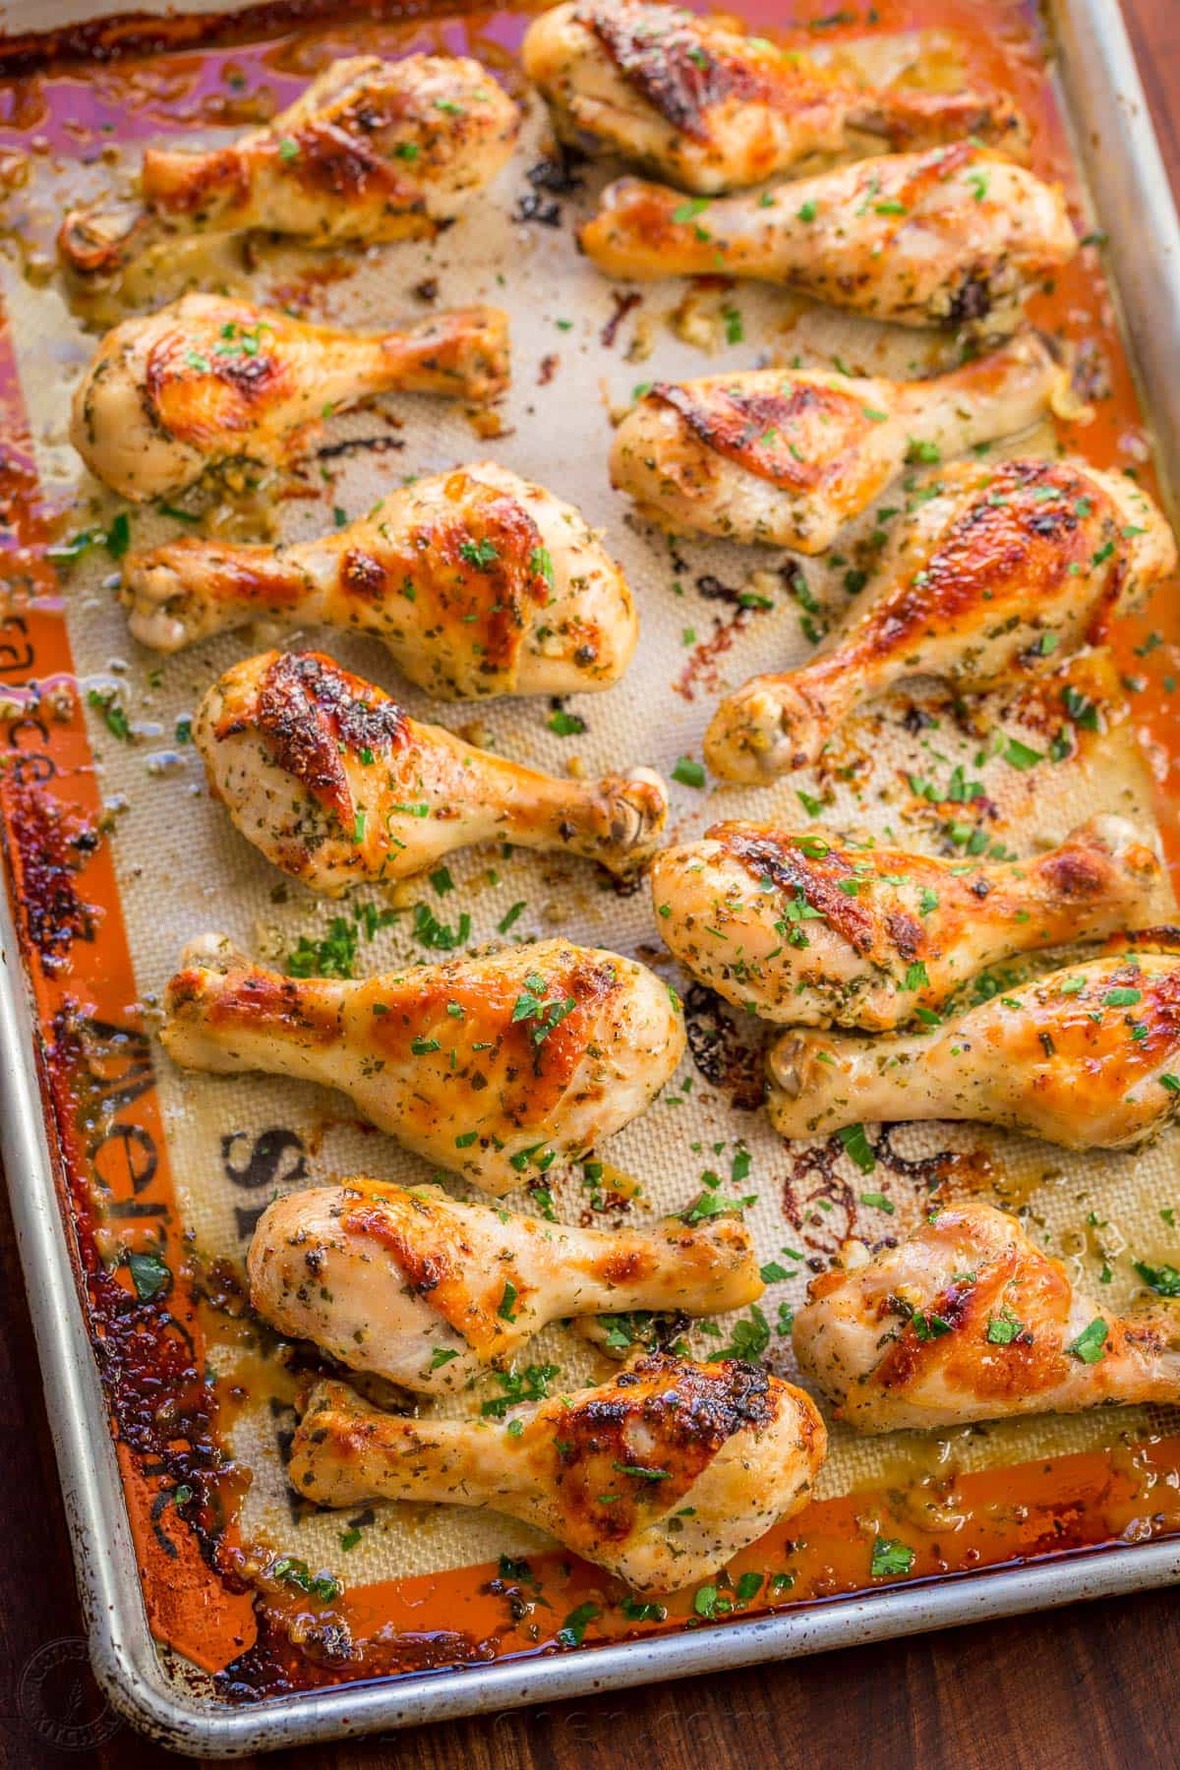 Baked-Chicken-Legs-with-Garlic-and-Dijon-2